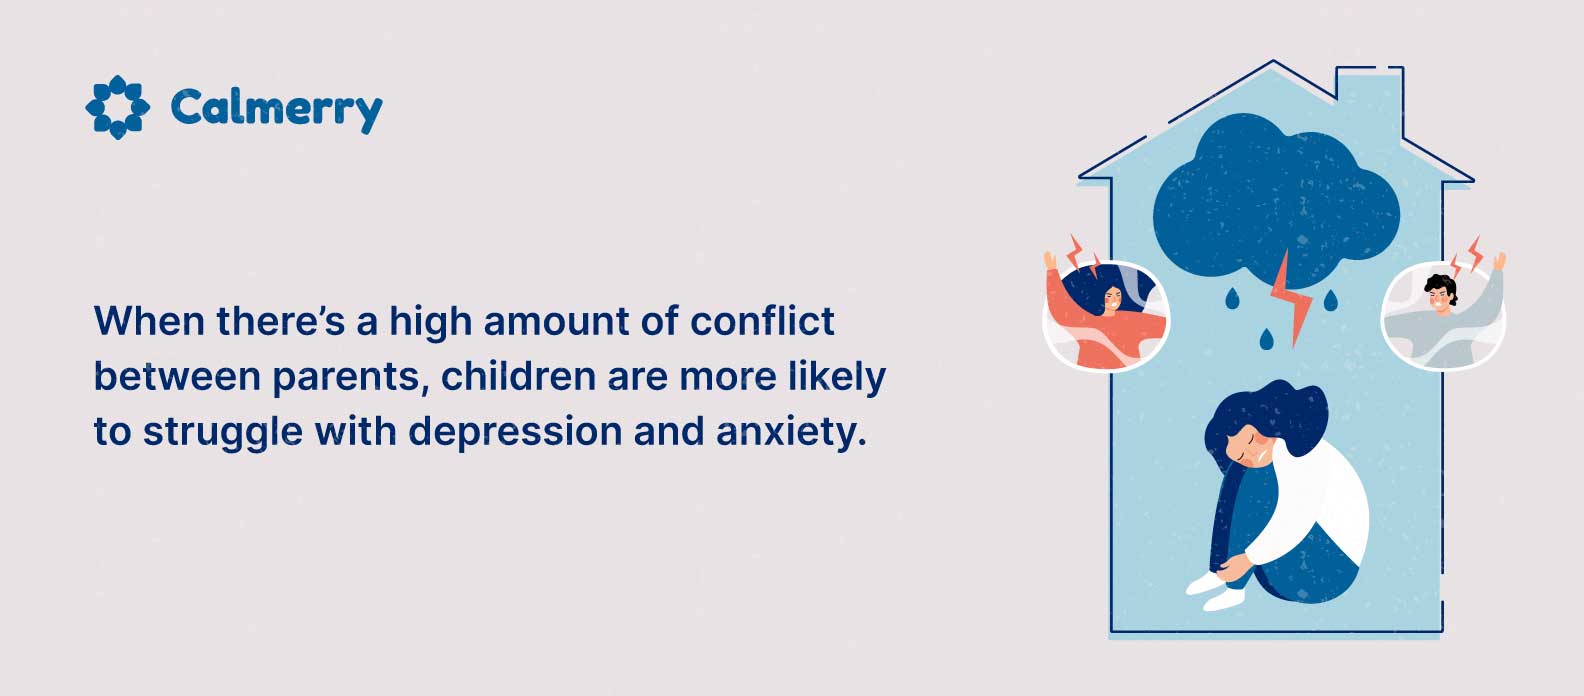 When there’s a high amount of conflict between parents, children are more likely to struggle with depression and anxiety.